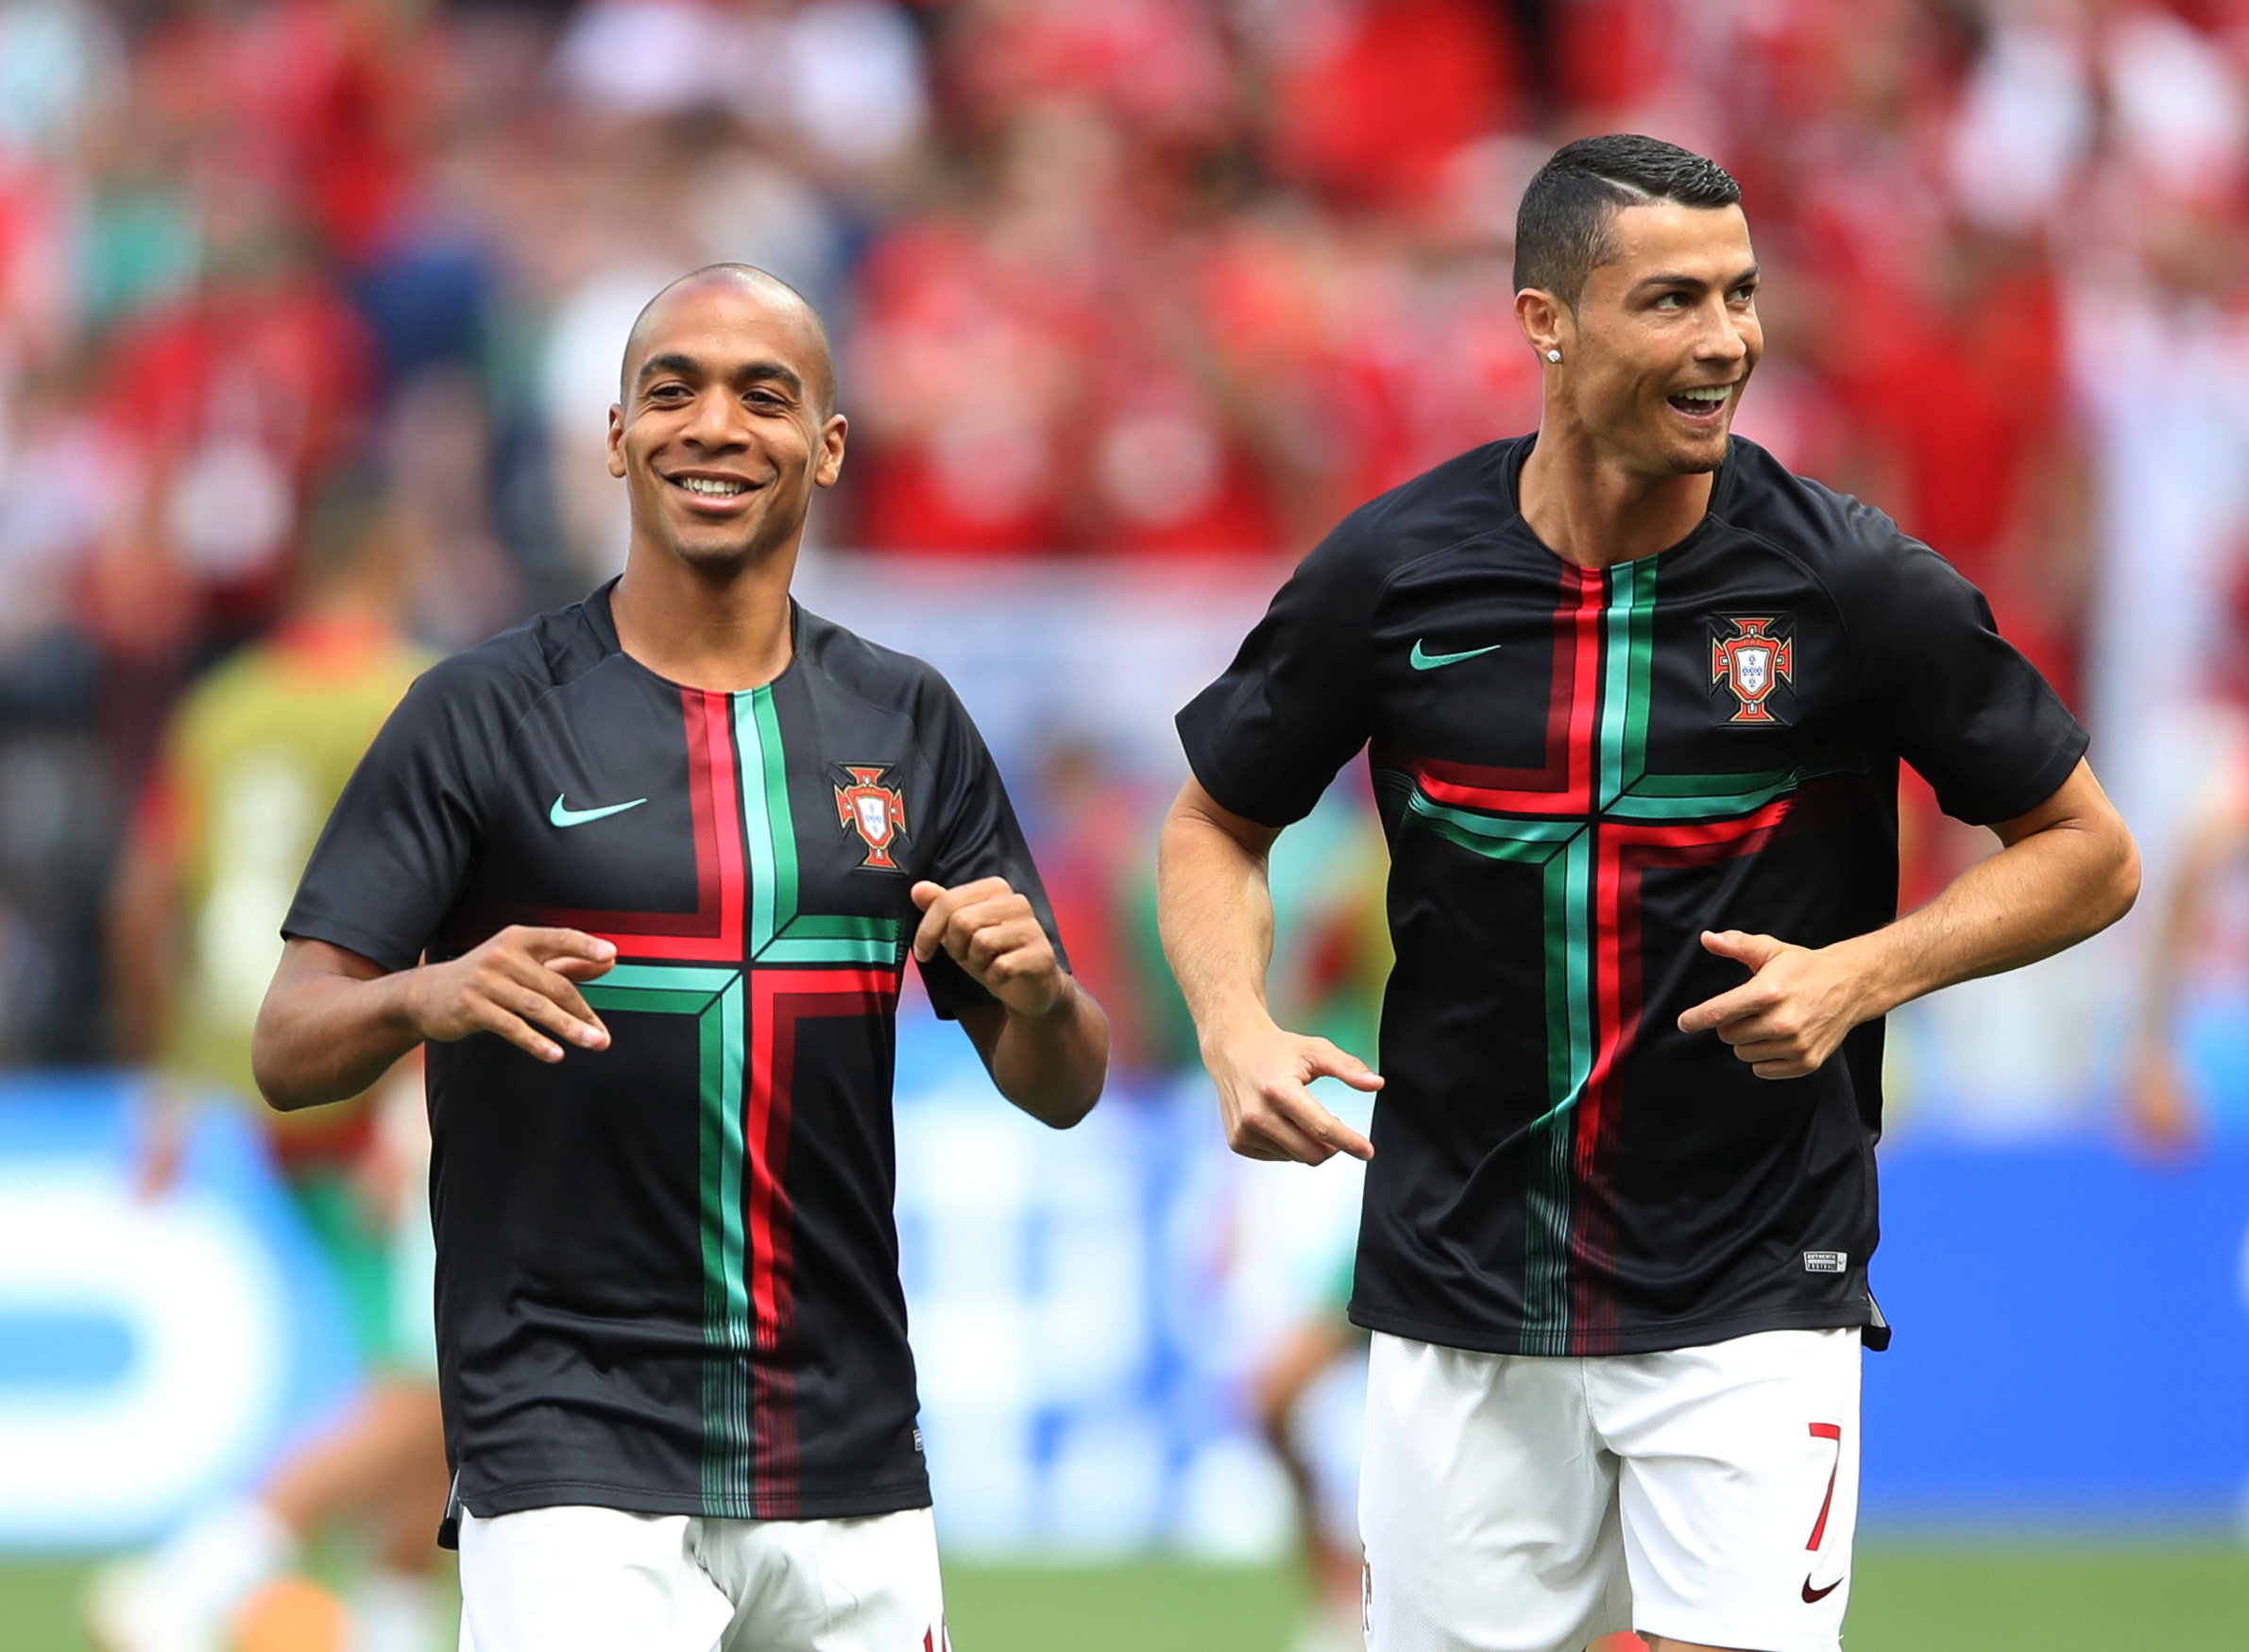 Soccer Football - World Cup - Group B - Portugal vs Morocco - Luzhniki Stadium, Moscow, Russia - June 20, 2018   Portugal's Joao Mario and Cristiano Ronaldo during the warm up before the match. Photo: REUTERS